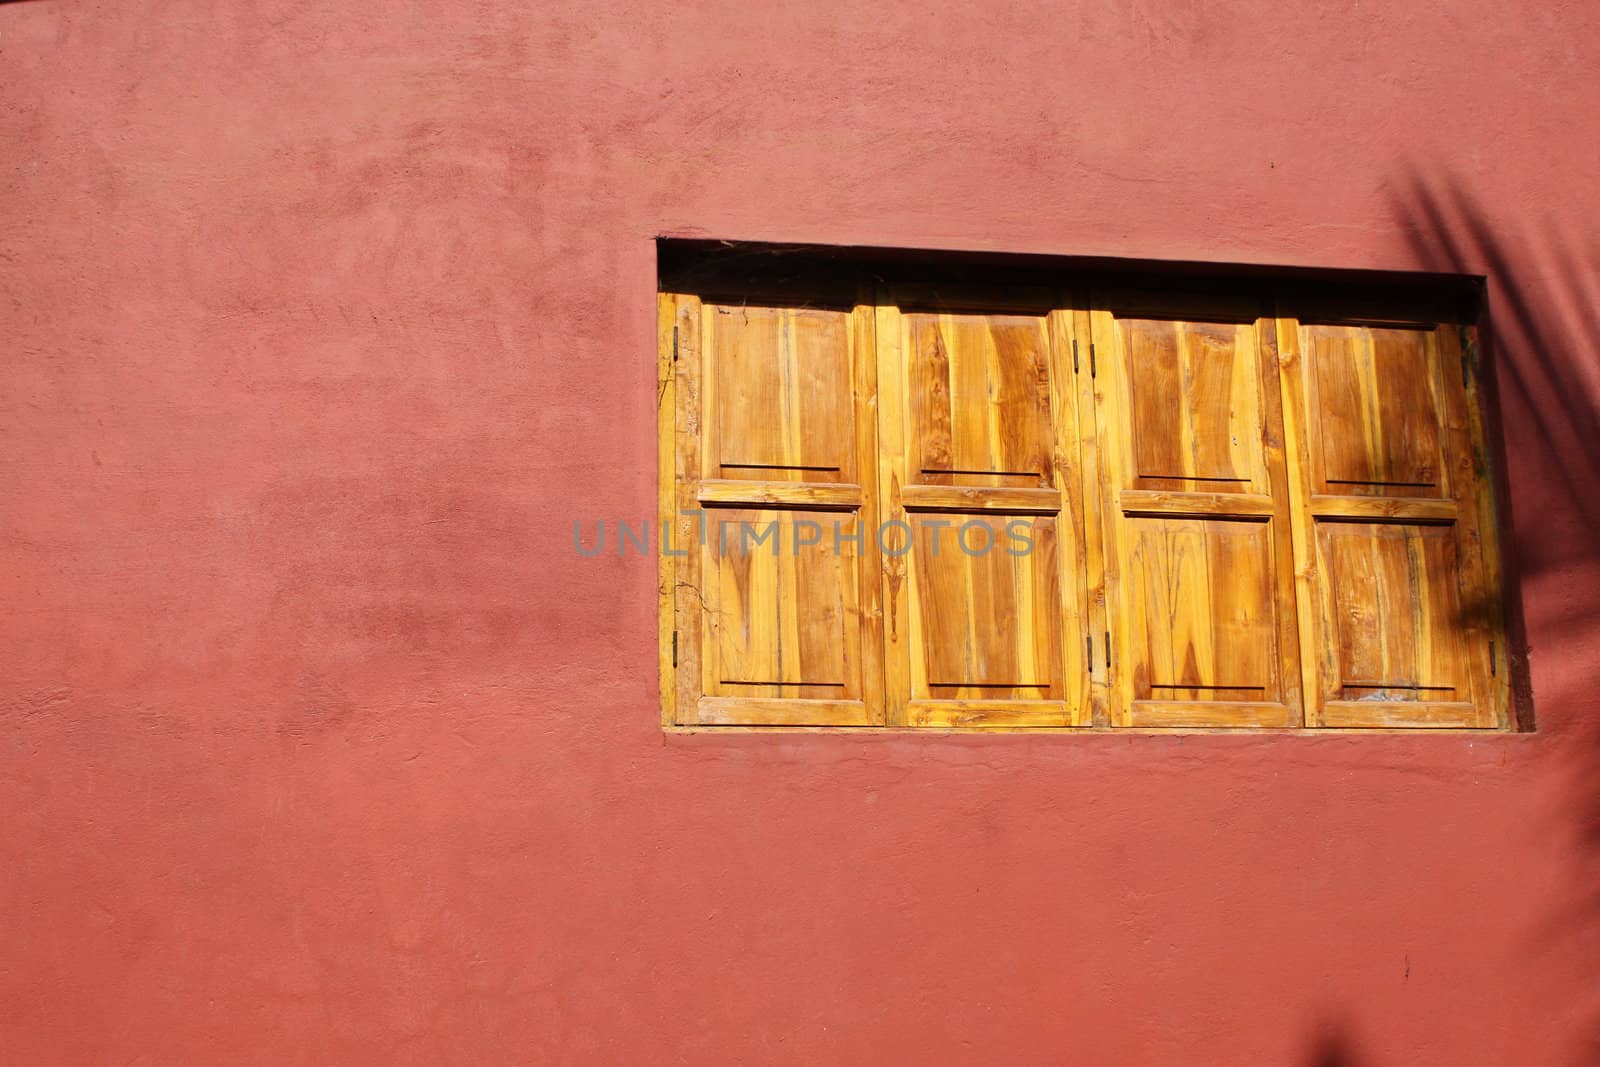 Red Wall Window by thefinalmiracle